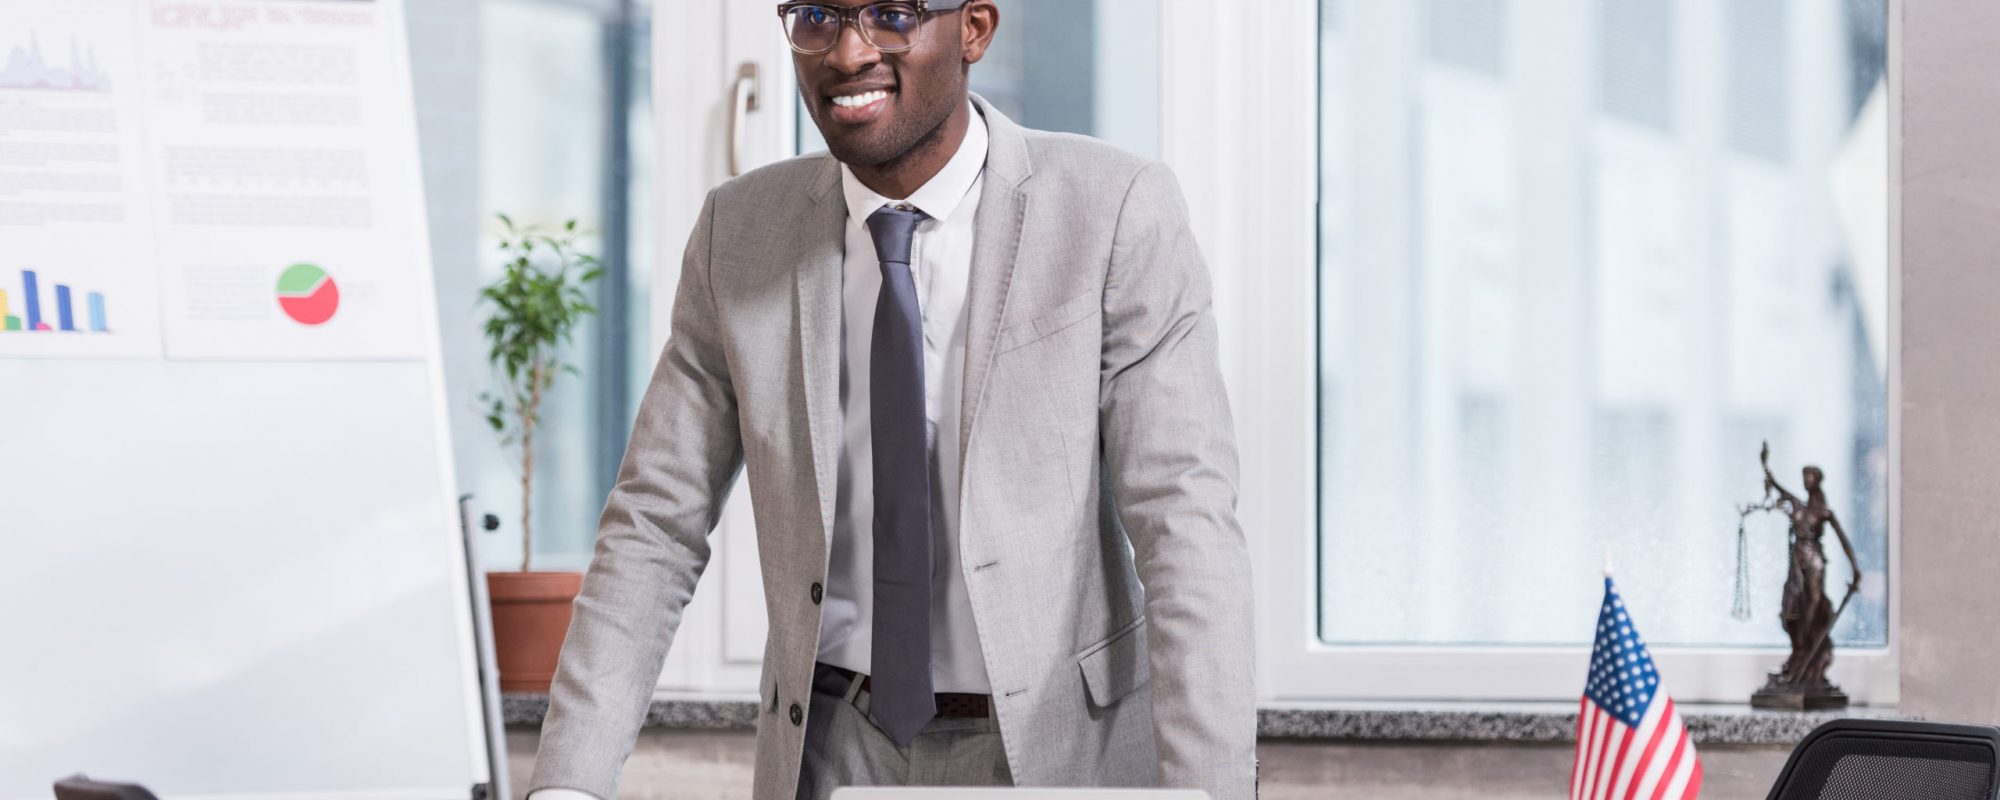 African american businessman smiling in modern office